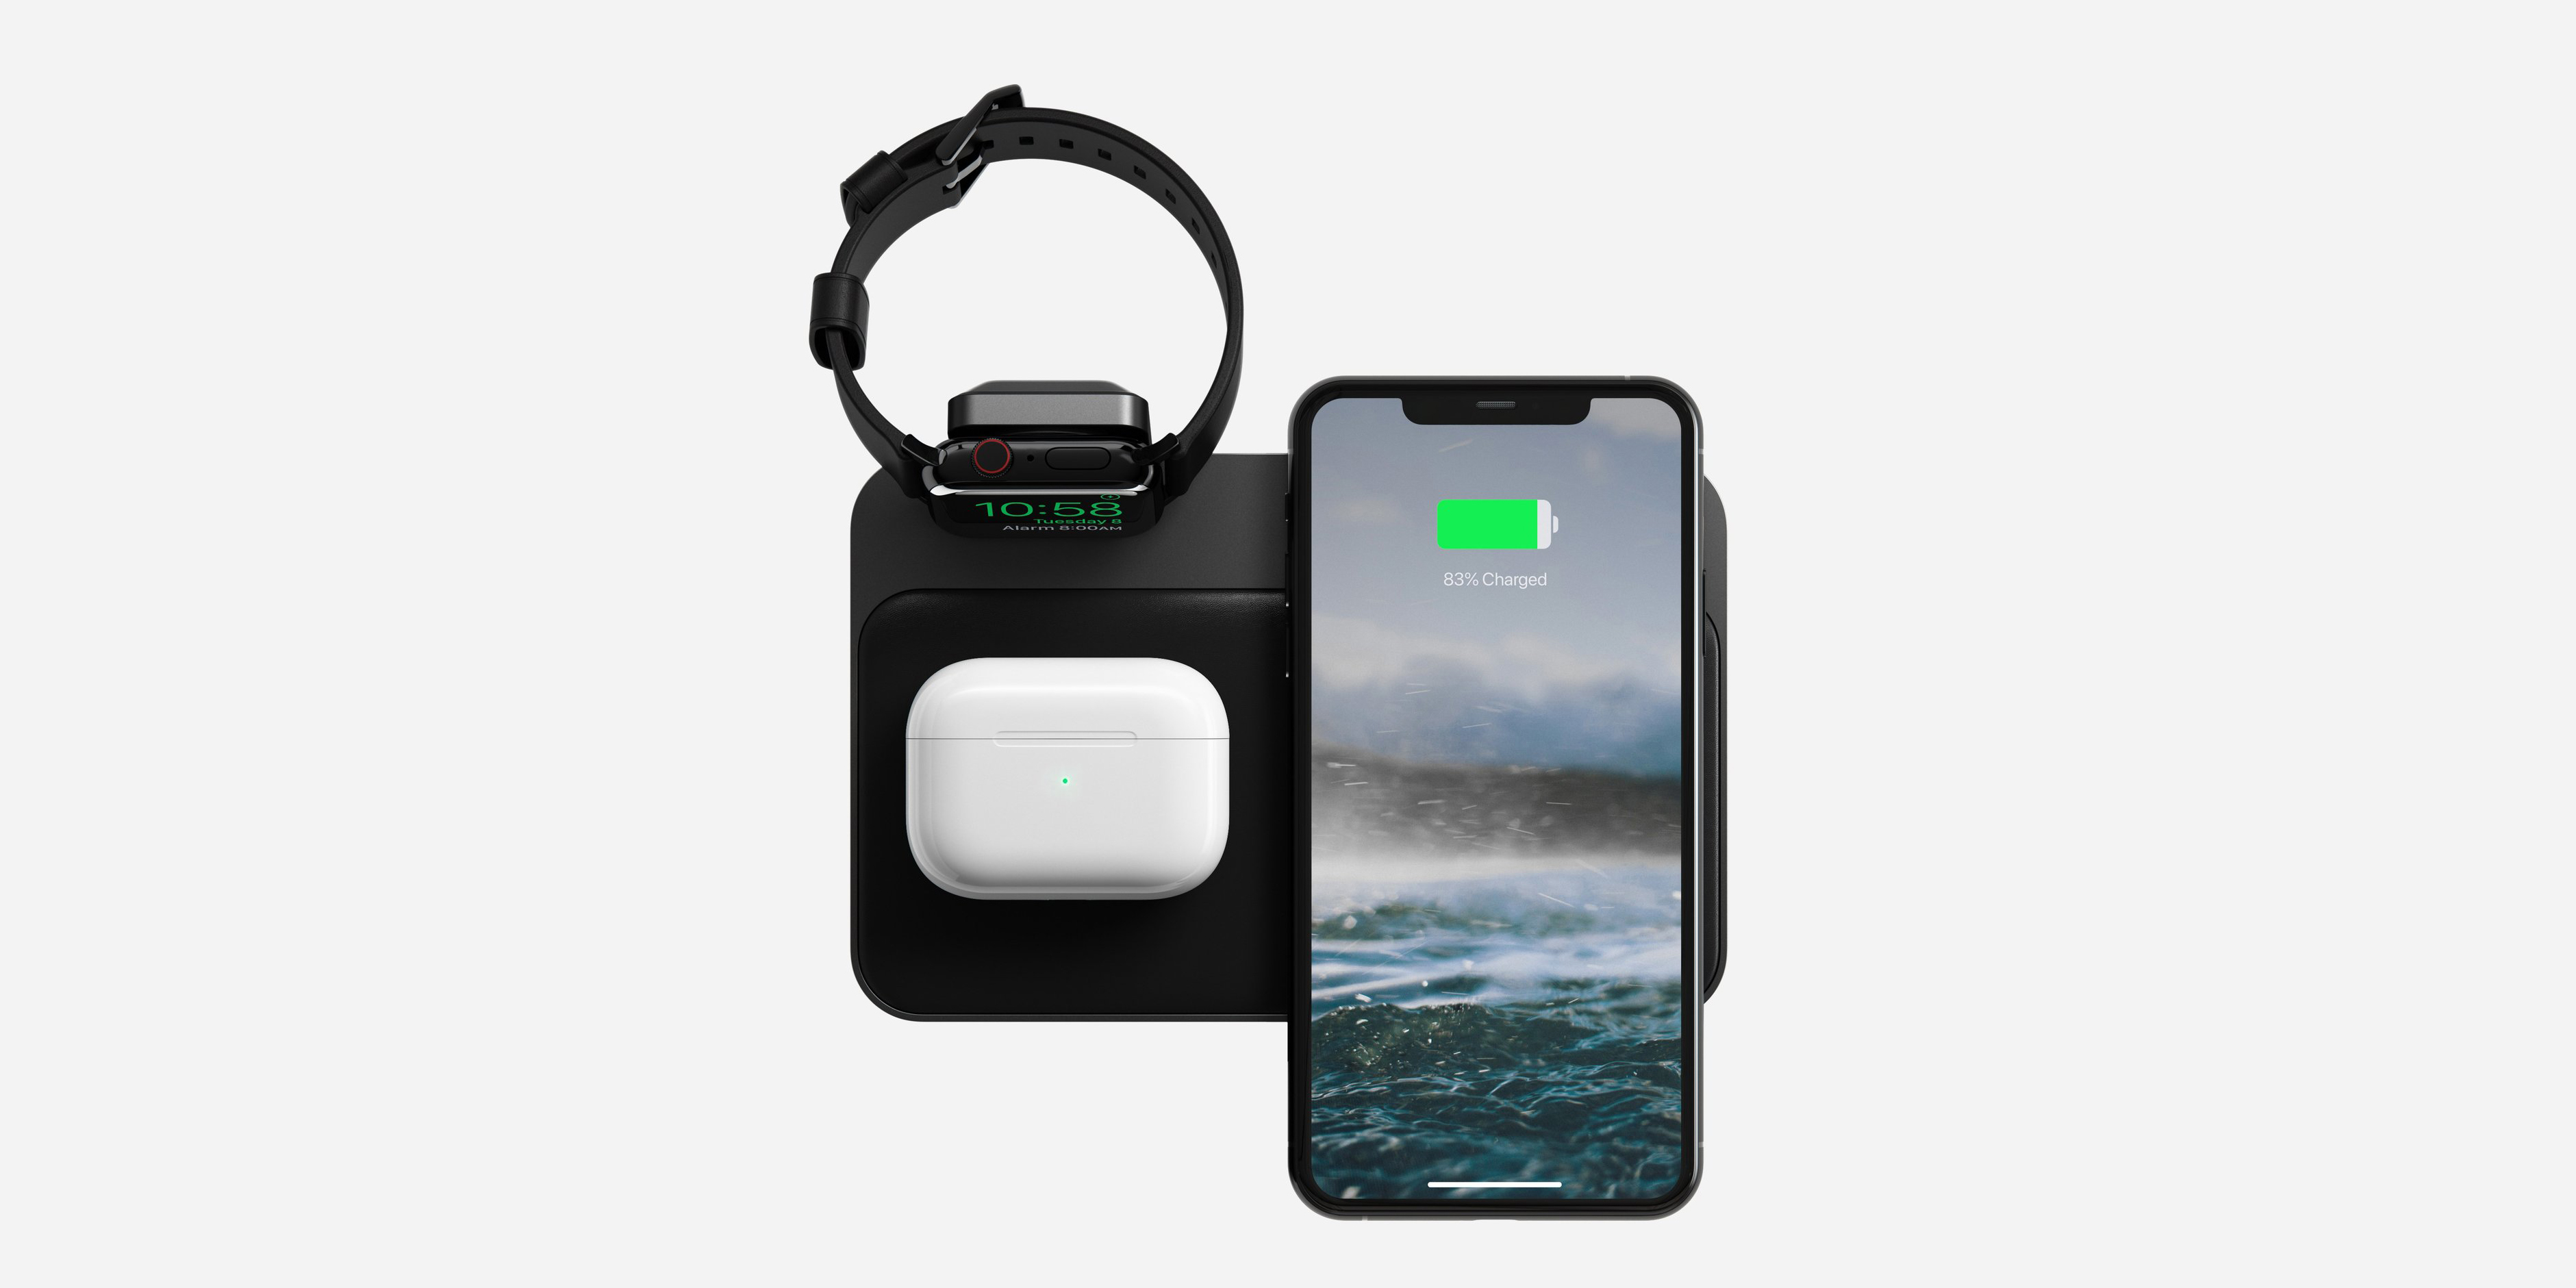 Nomad refreshes Apple Watch Base Station, charges 5 devices - 9to5Toys